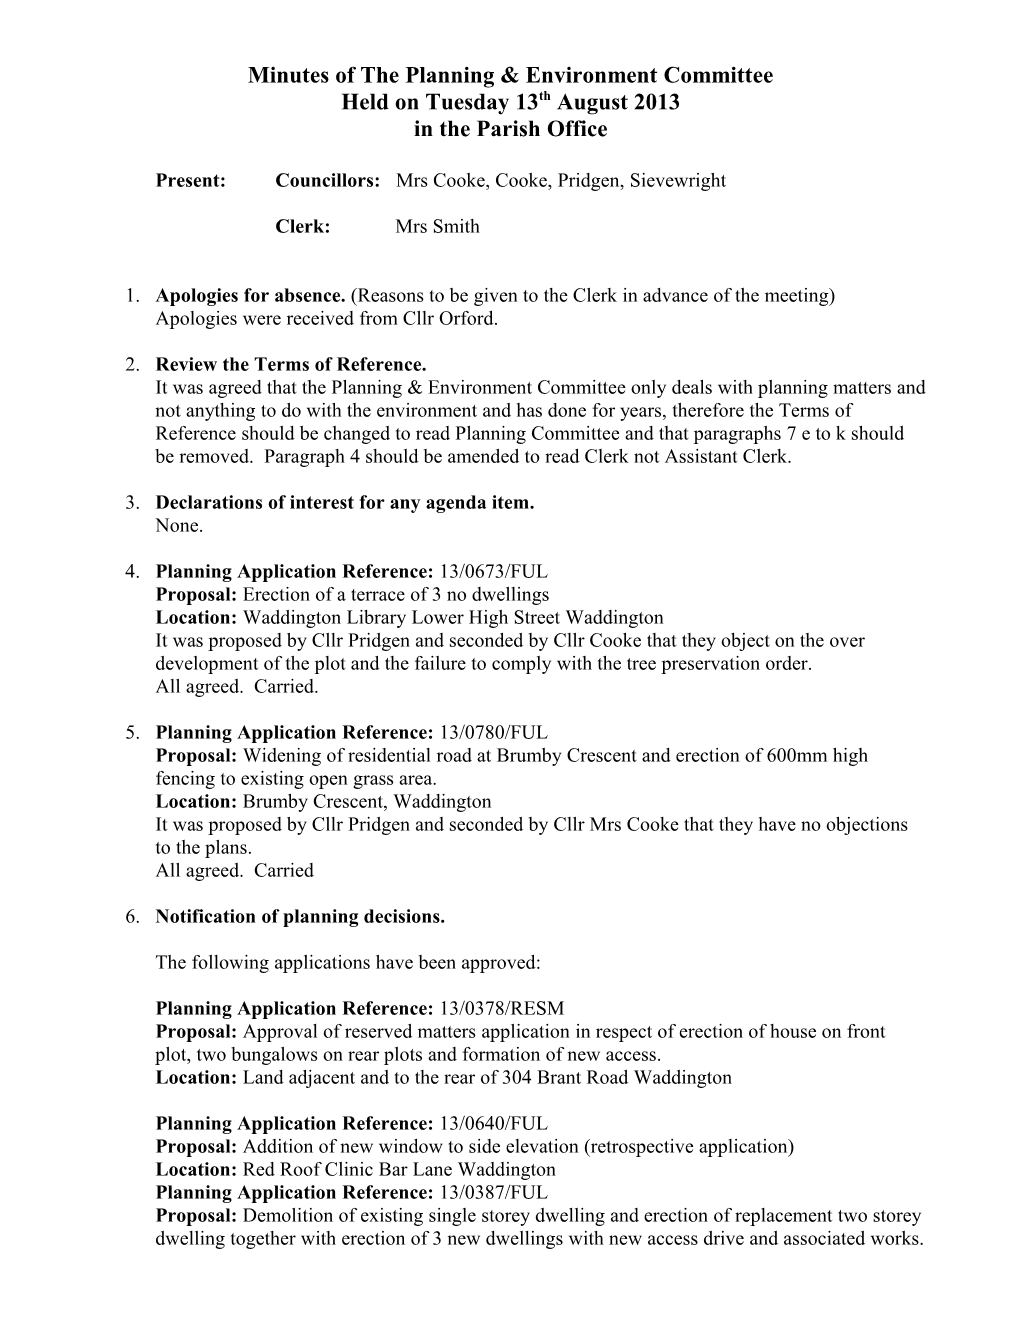 Minutes of the Planning & Environment Committee